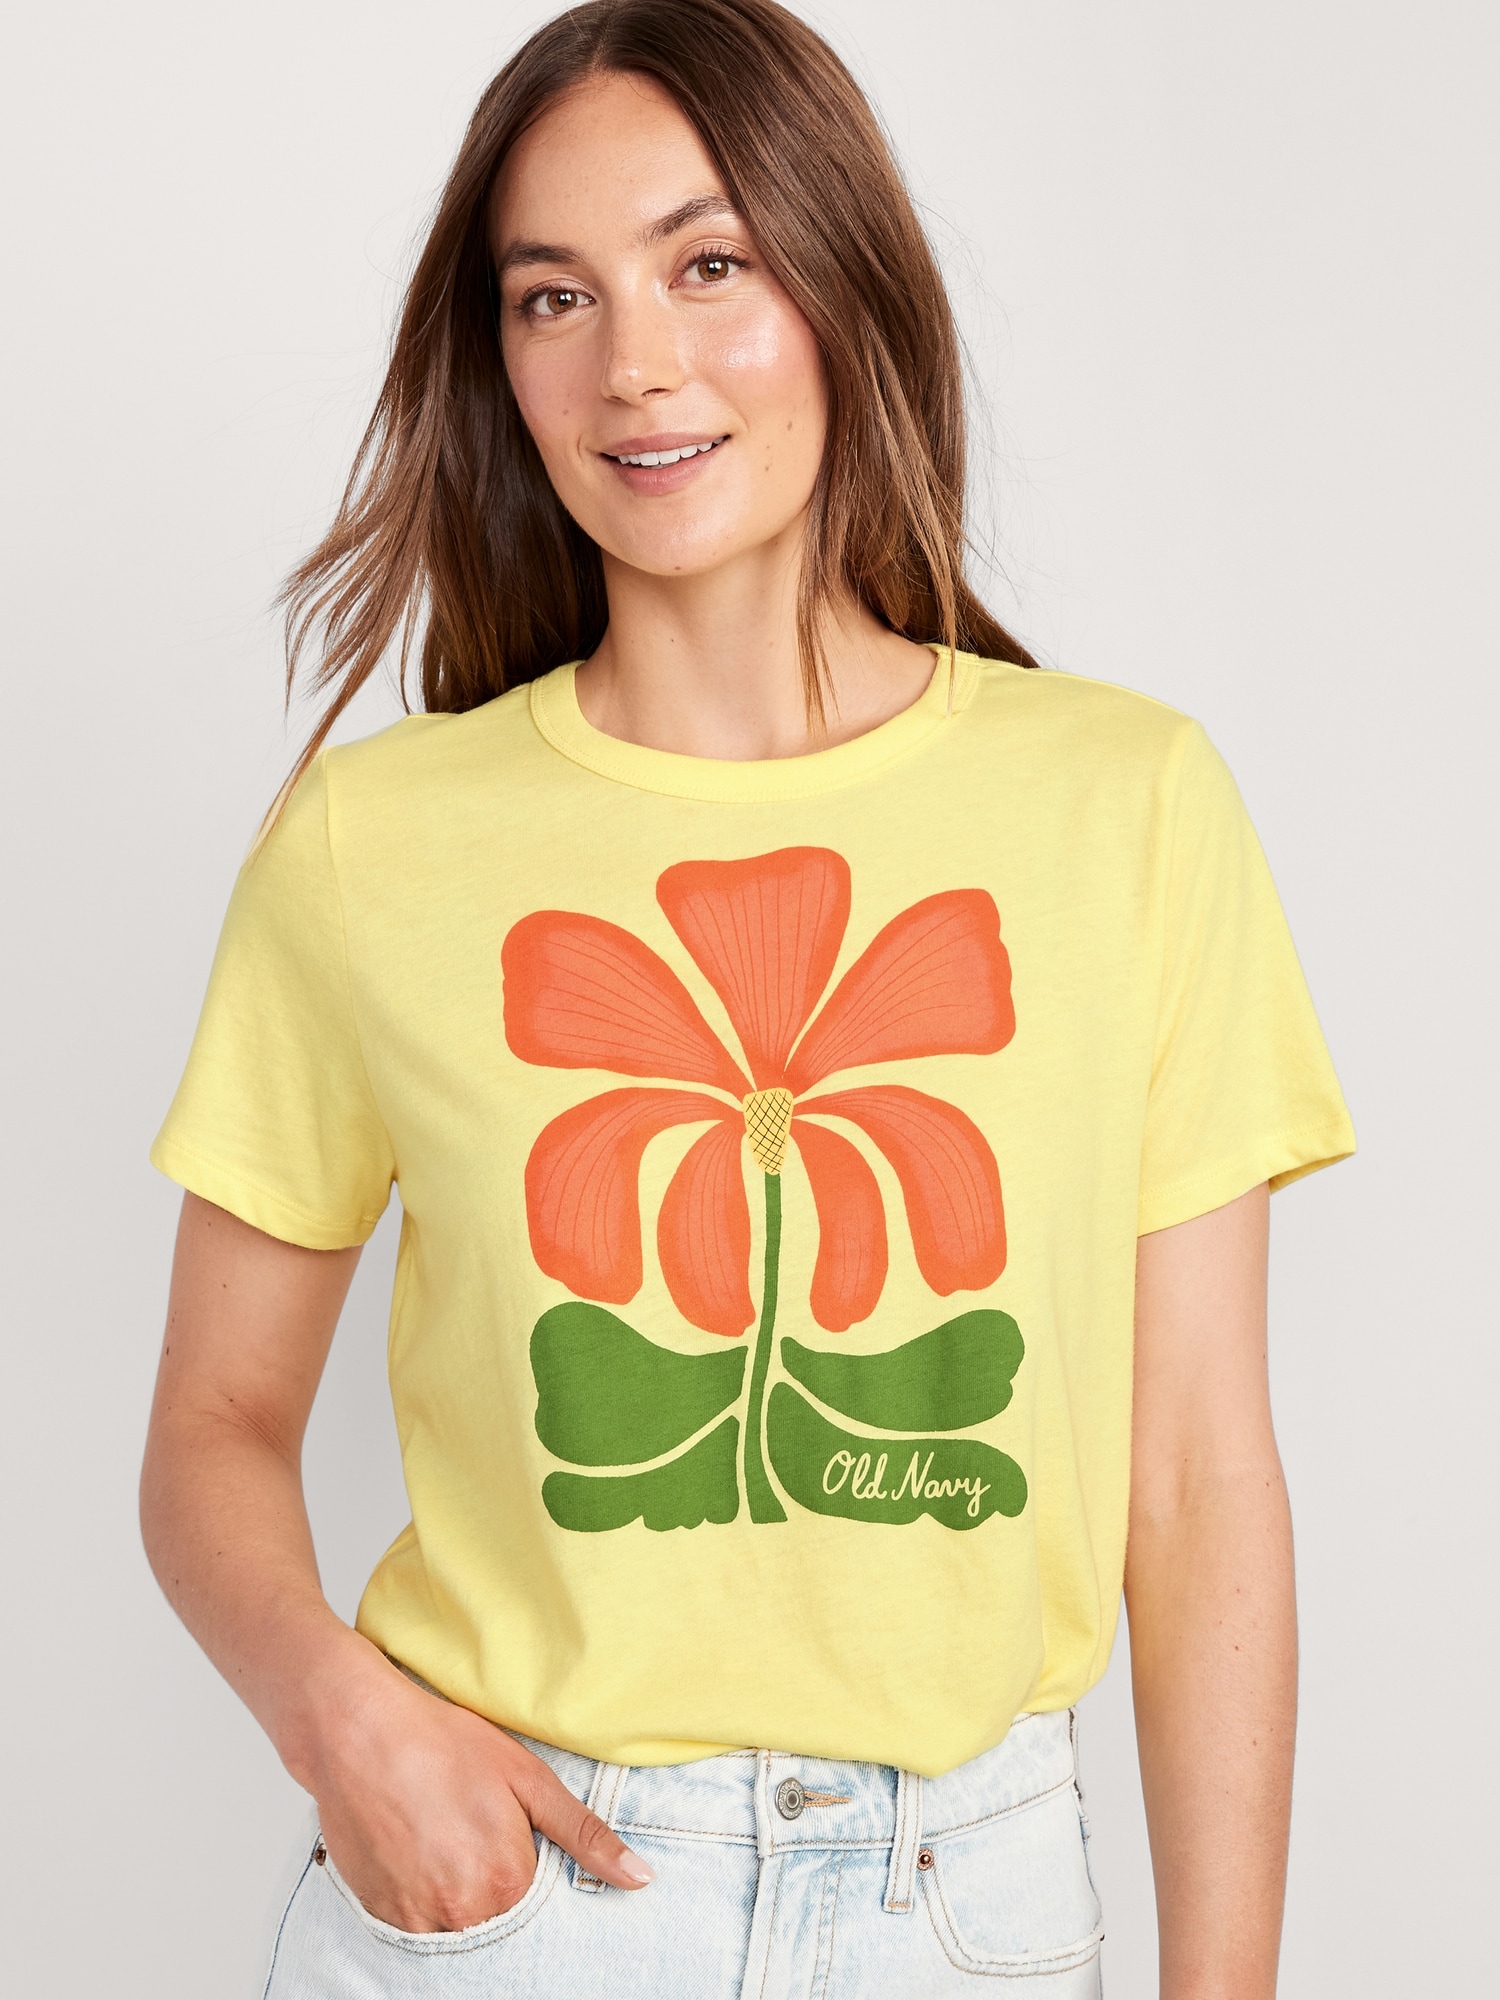 Old Navy EveryWear Logo Graphic T-Shirt for Women yellow. 1